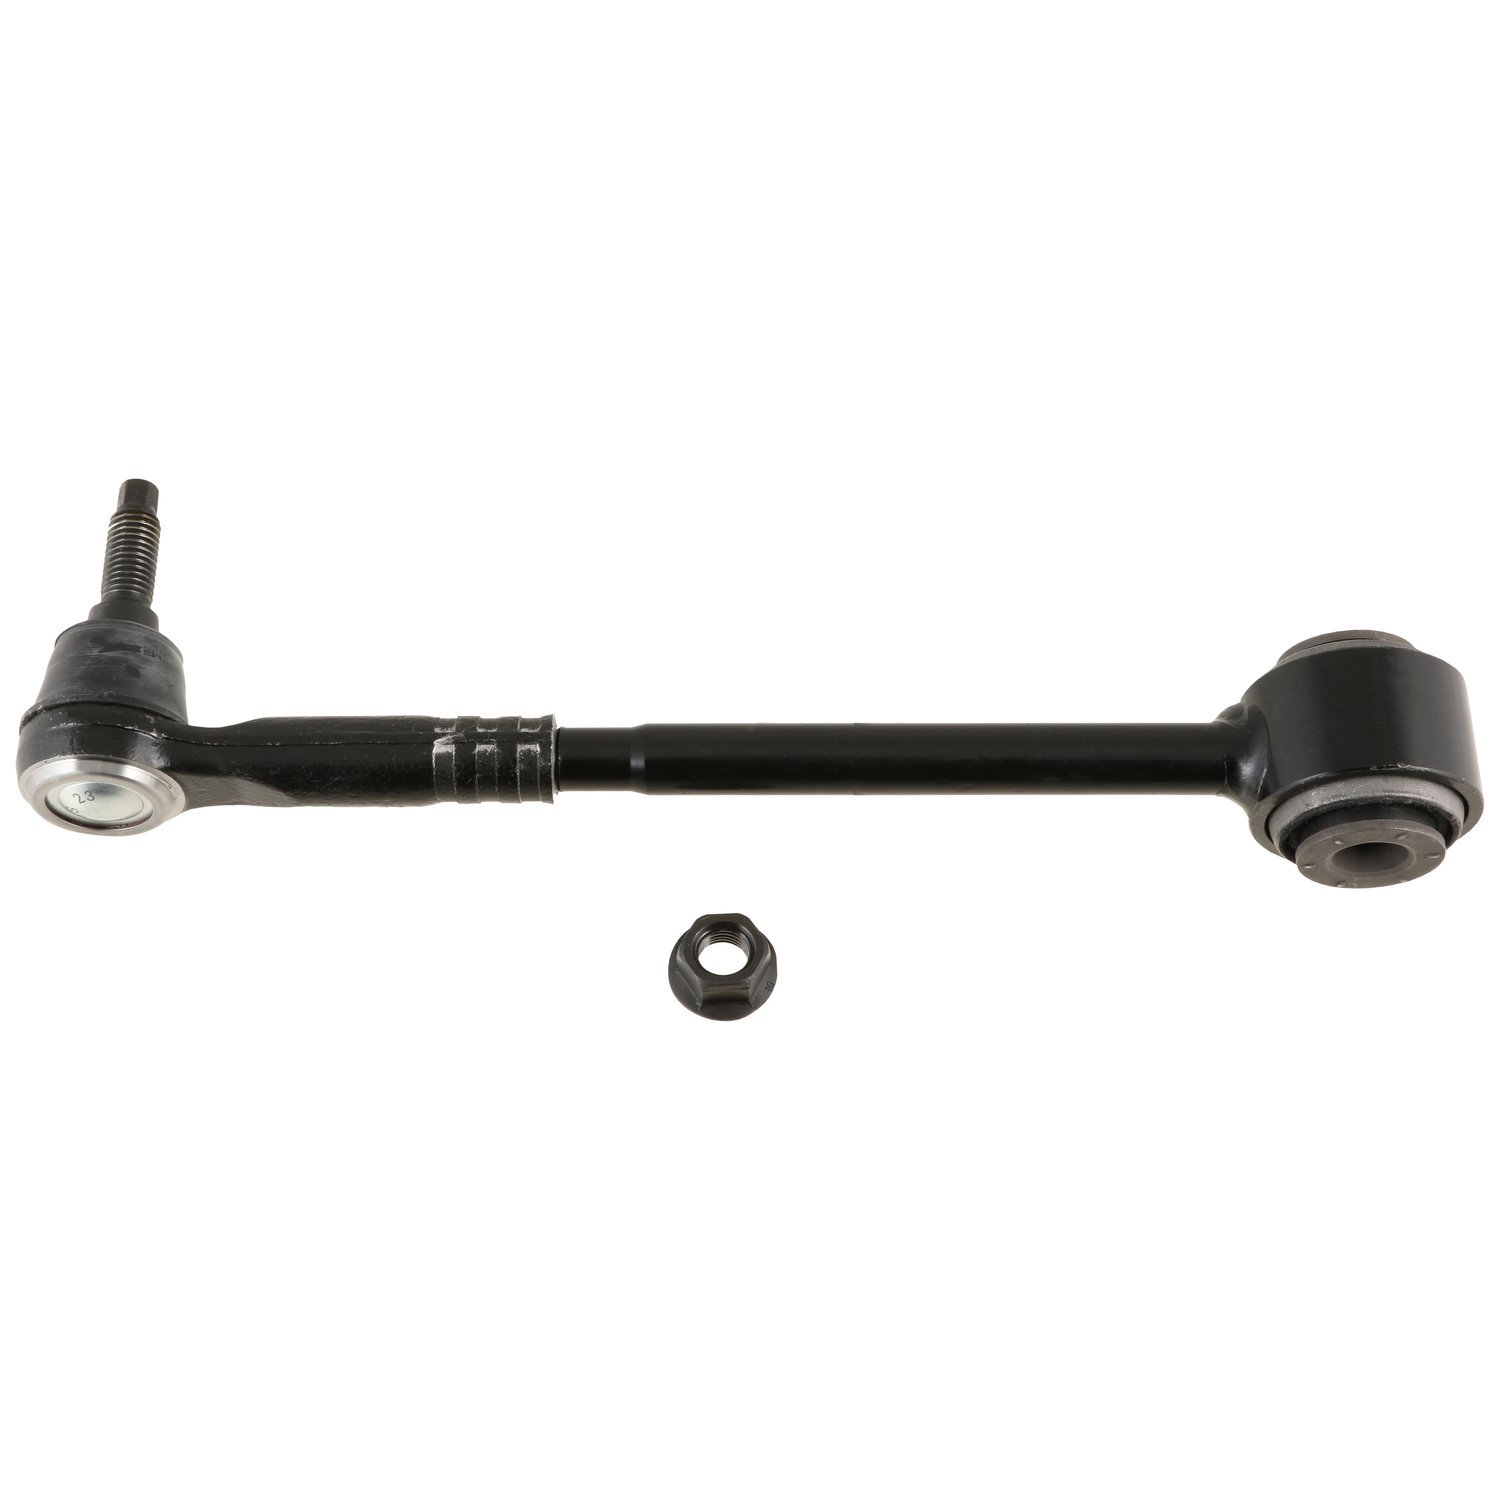 JTC2626 Control Arm Assembly Fits Select Ford Models, Position: Left/Driver or Right/Passenger, Rear Upper Rearward